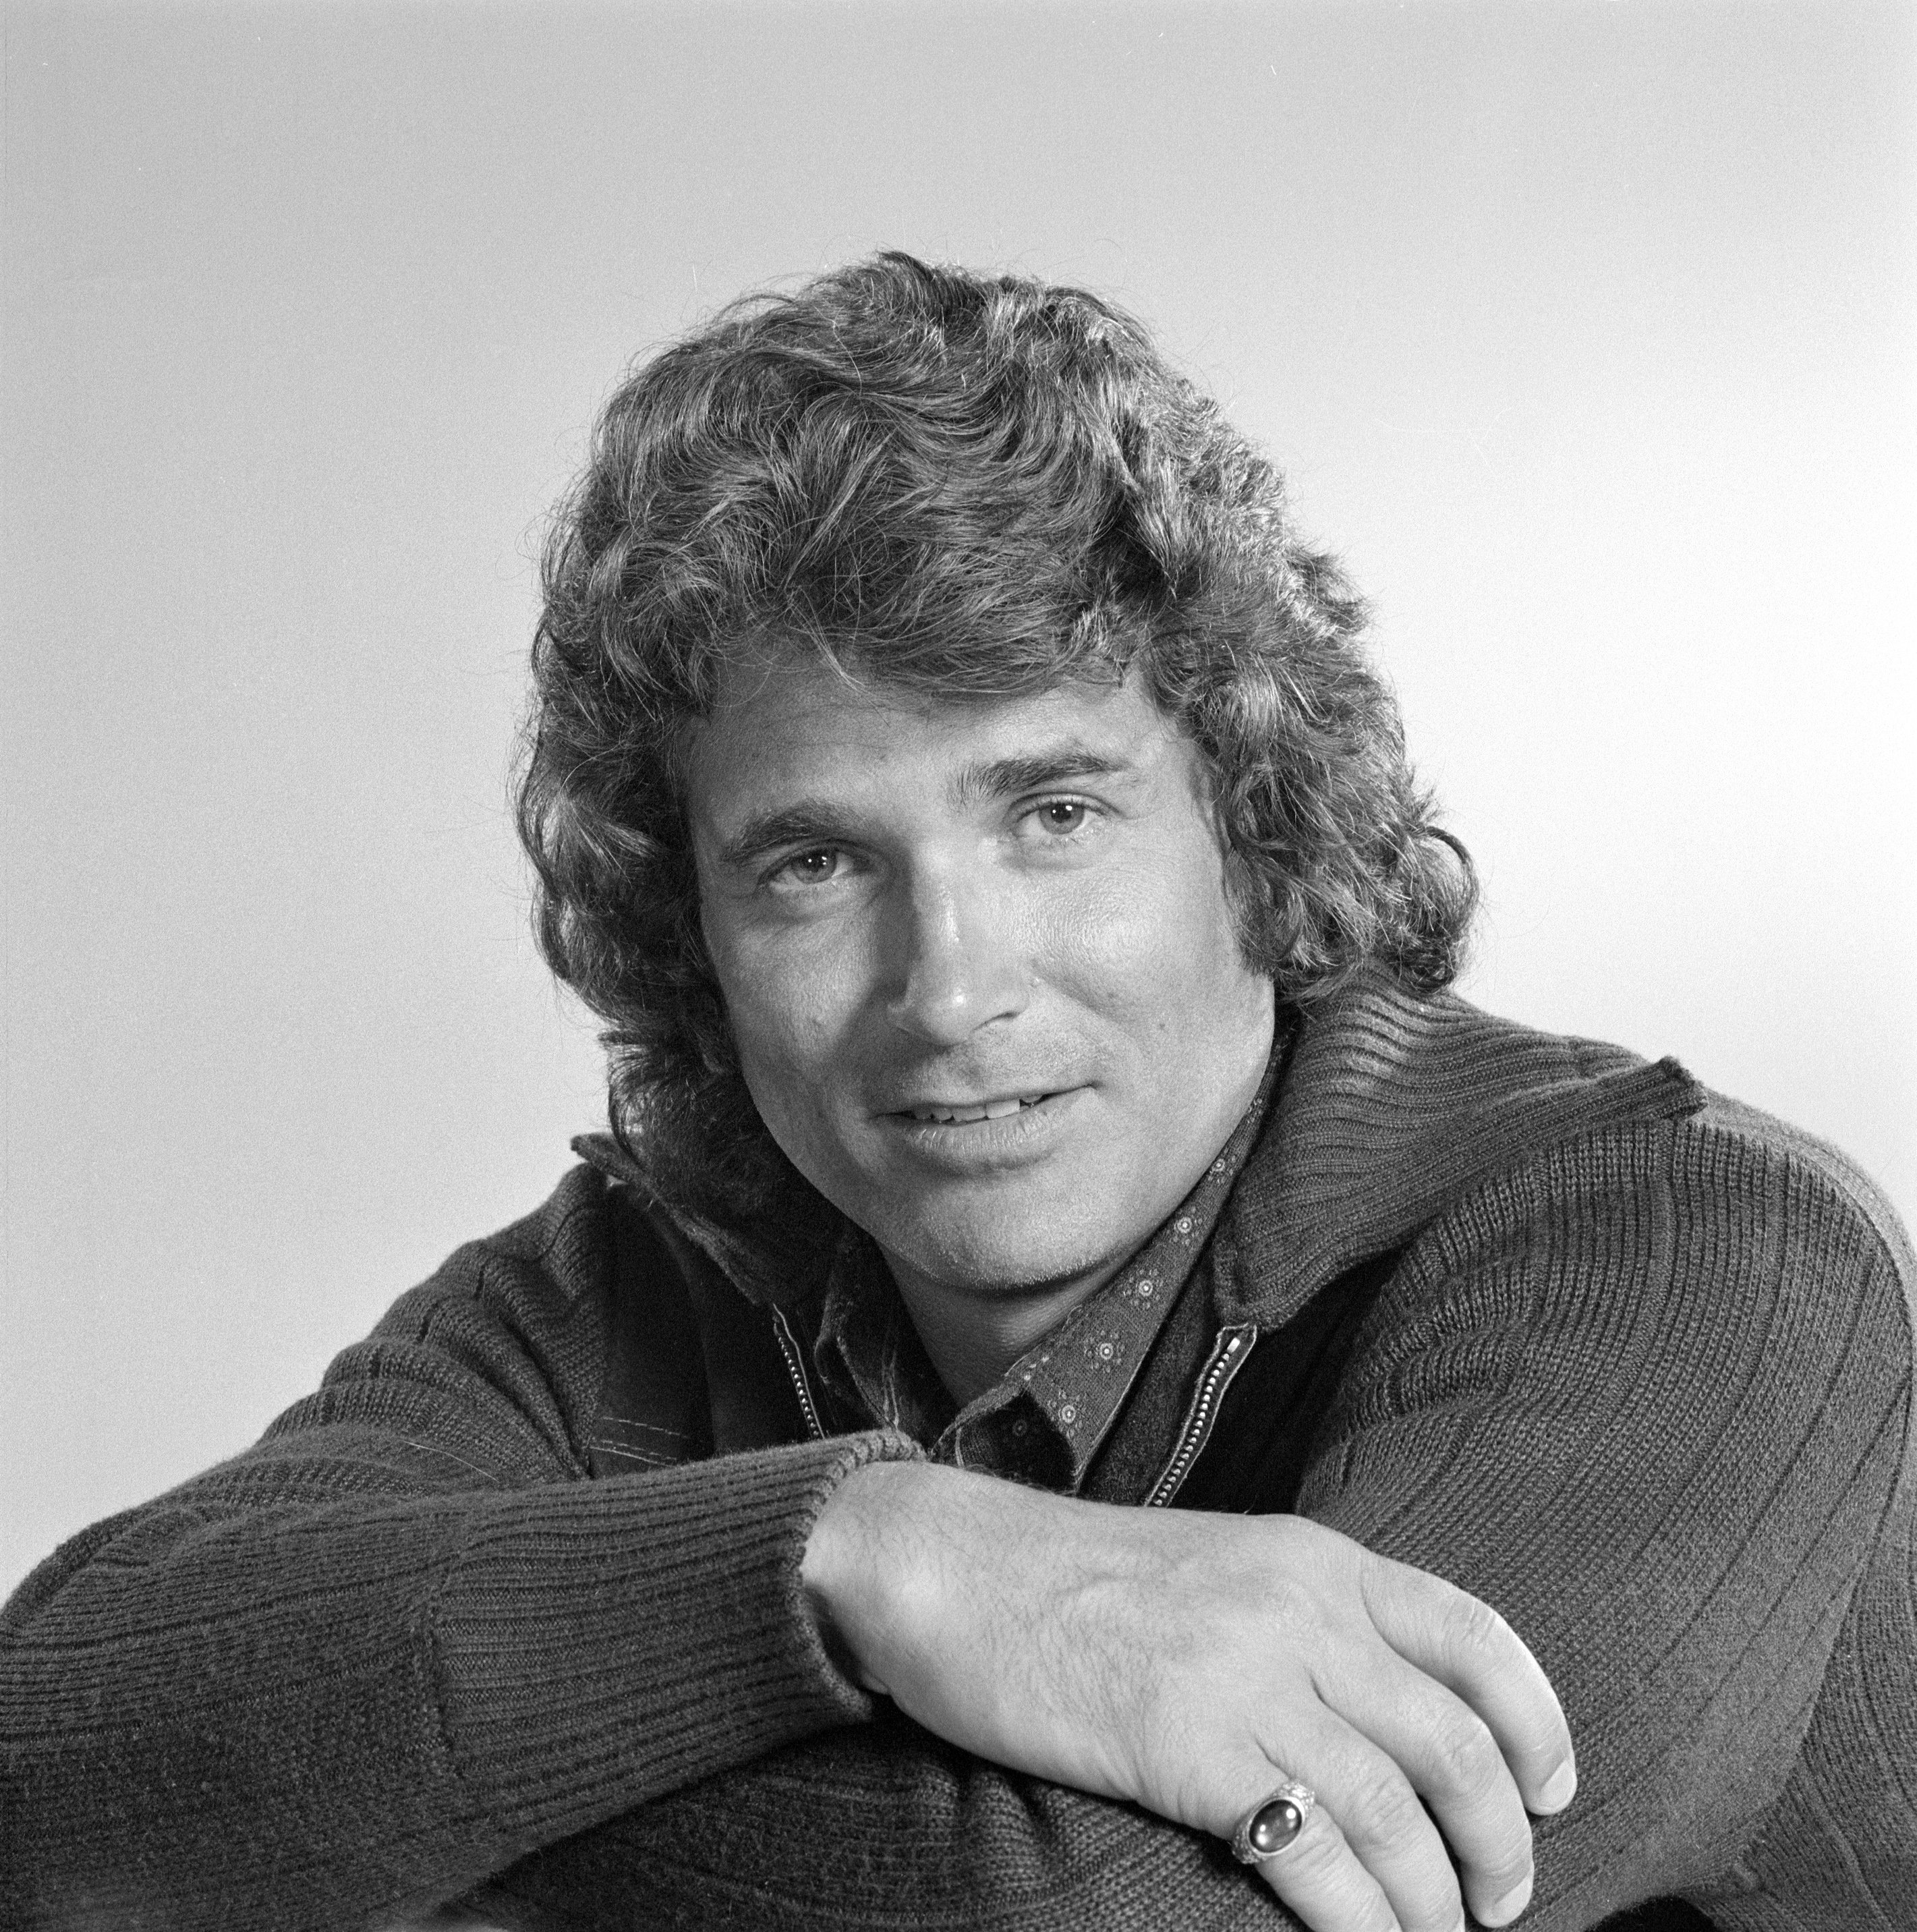 Michael Landon photographed for "American Jr. Miss" on March 26, 1974, in Los Angeles. | Source: CBS/Getty Images